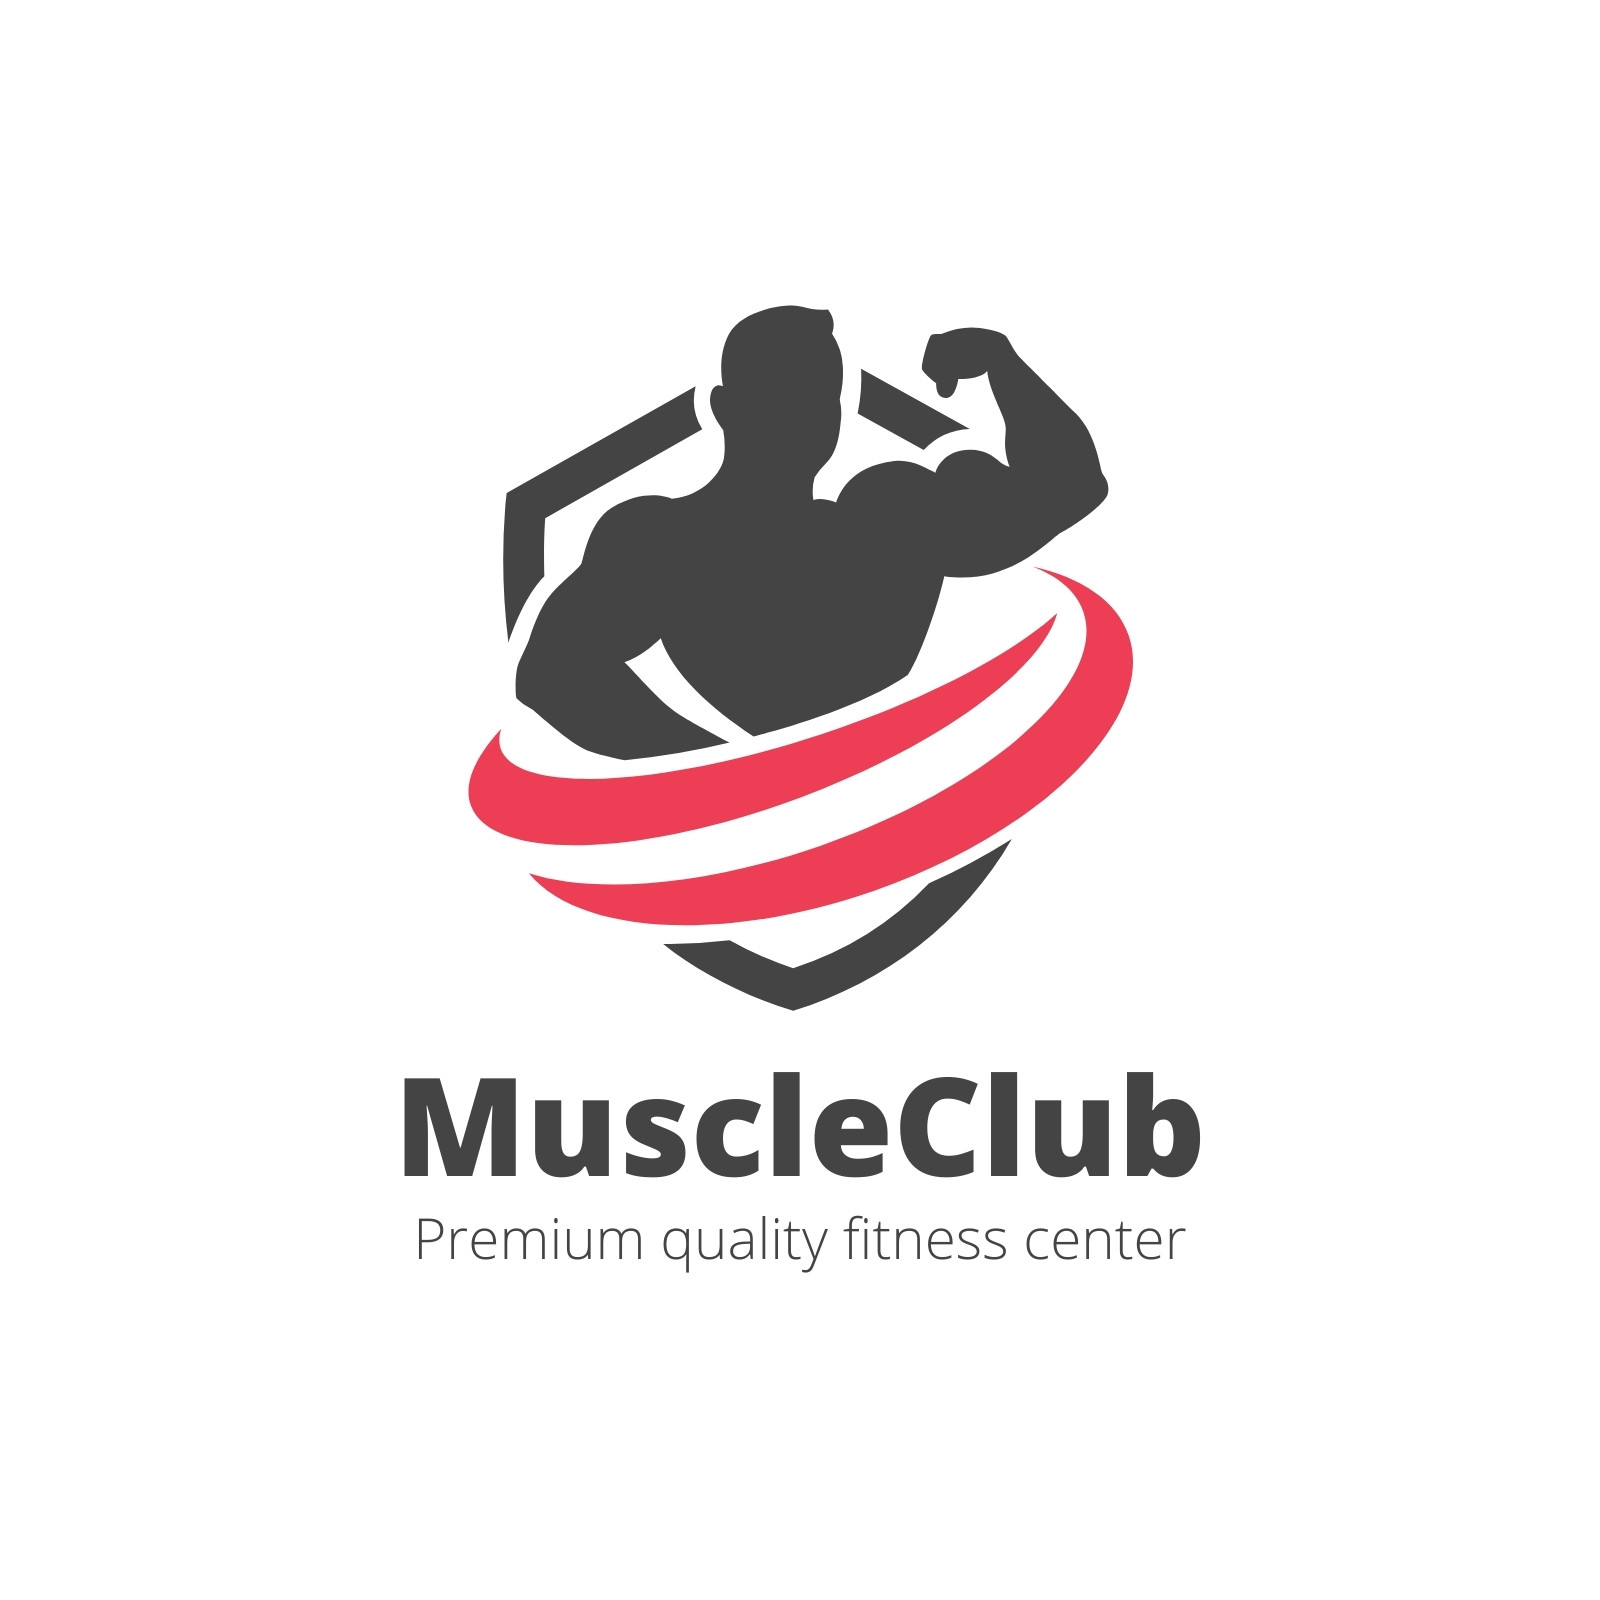 health and fitness logo png